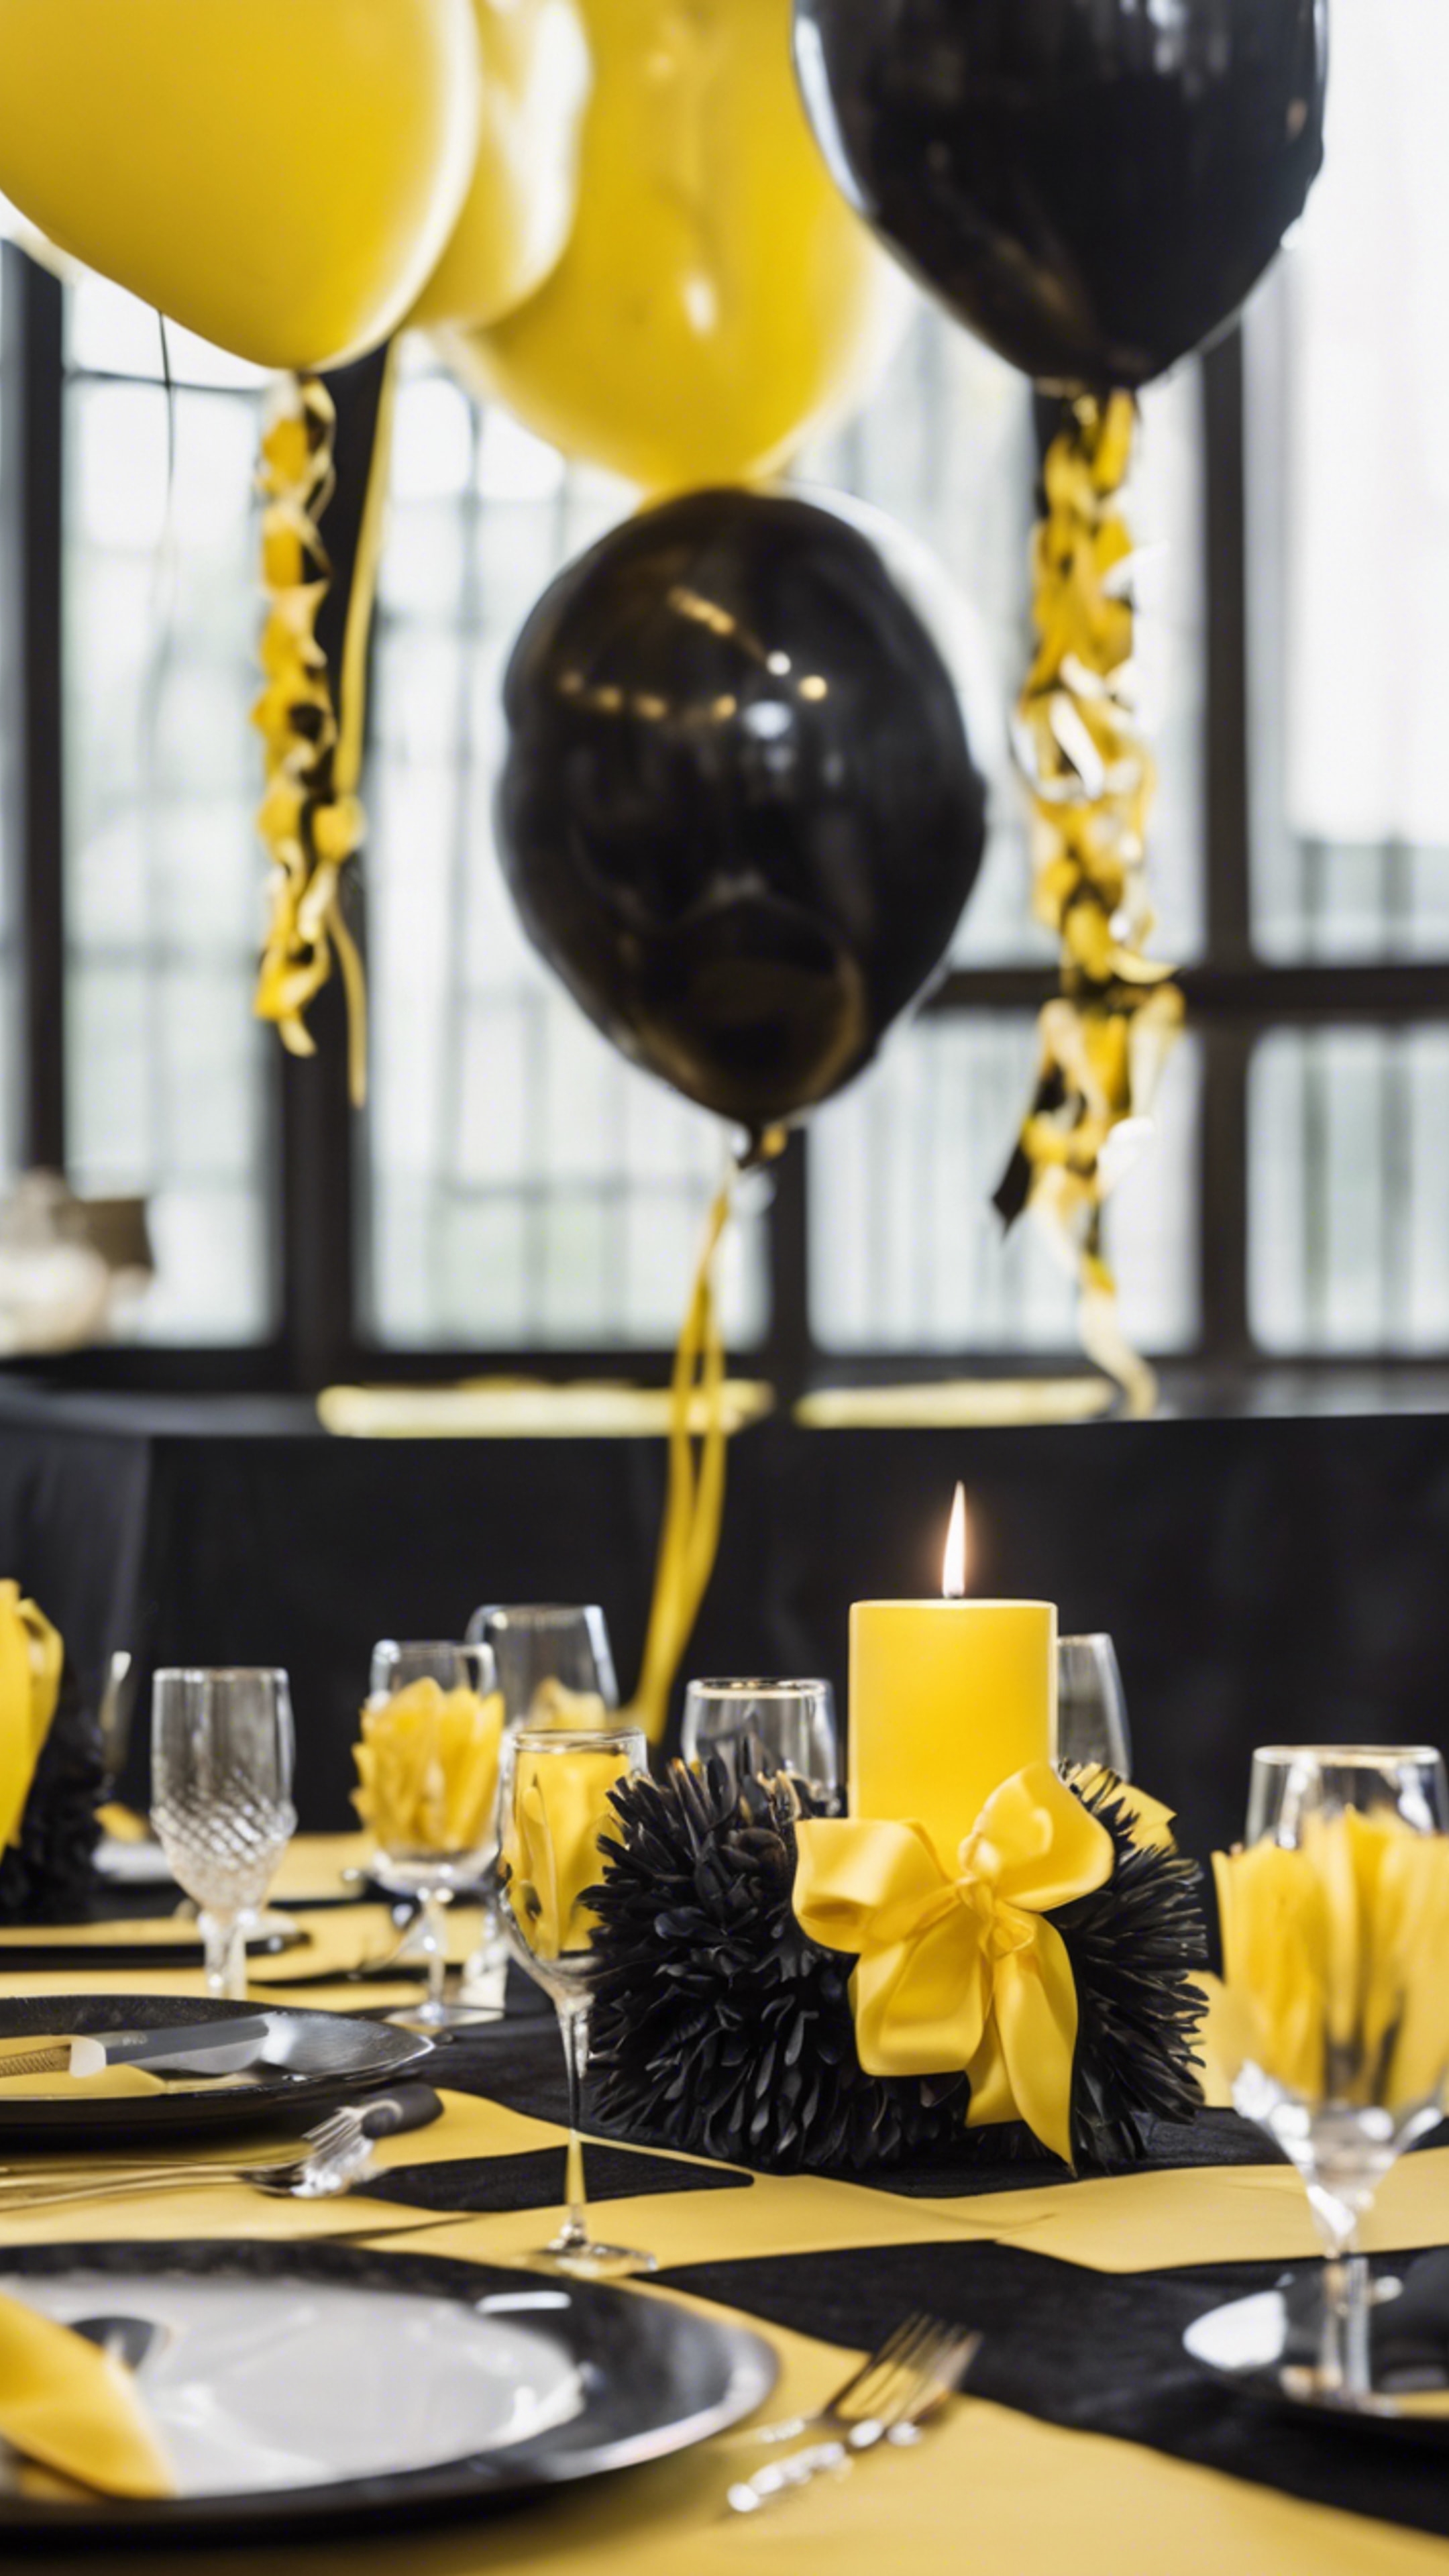 A table set with black and yellow themed party decorations for a birthday celebration. 墙纸[799426b85ea14846a022]